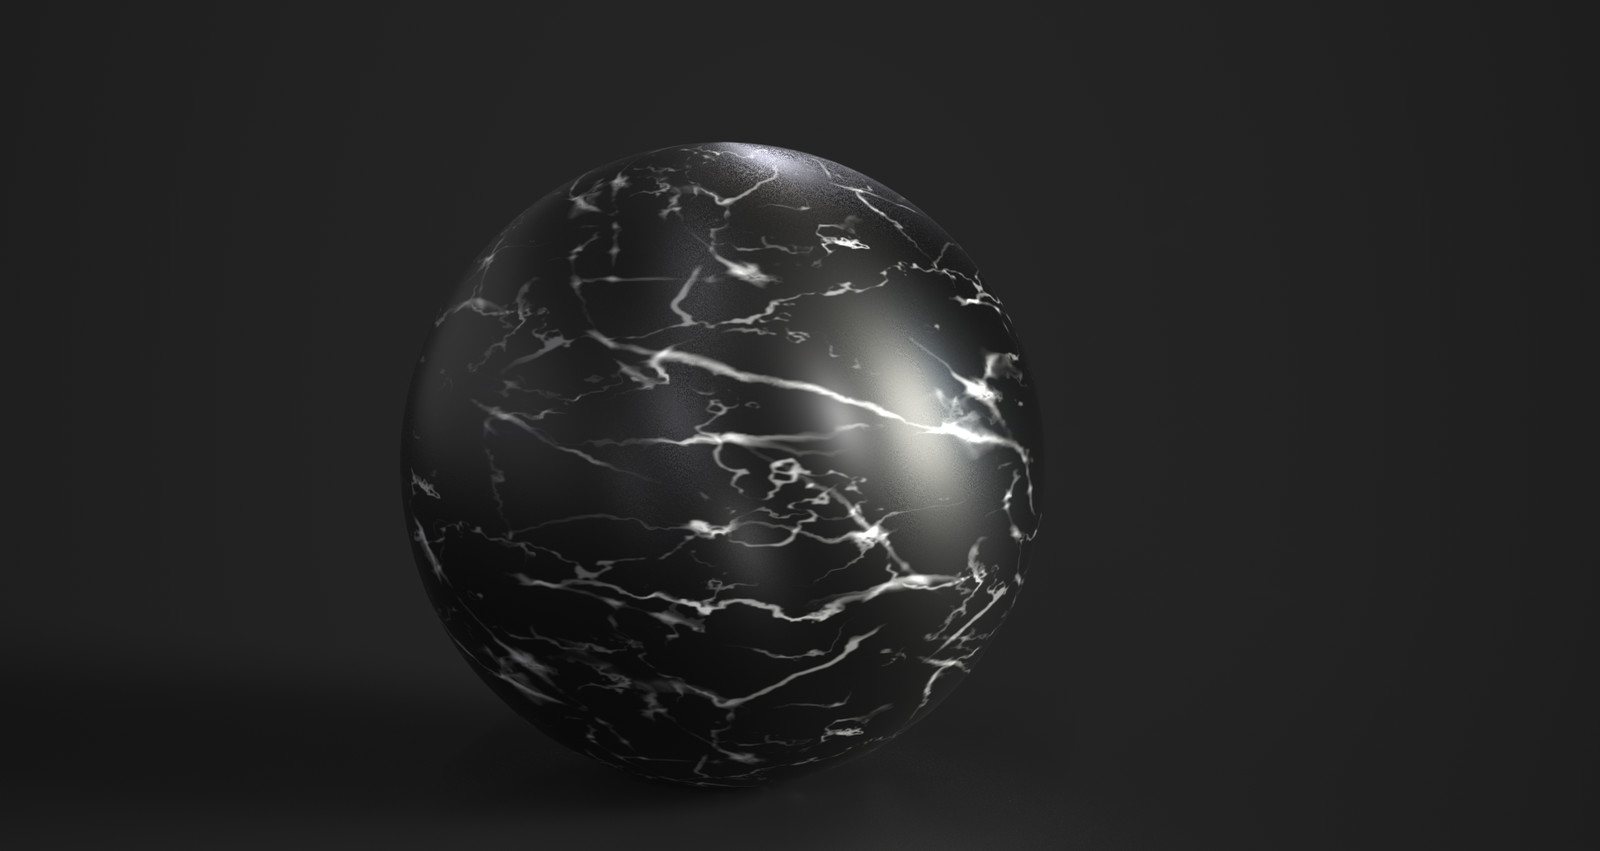 Marble Material